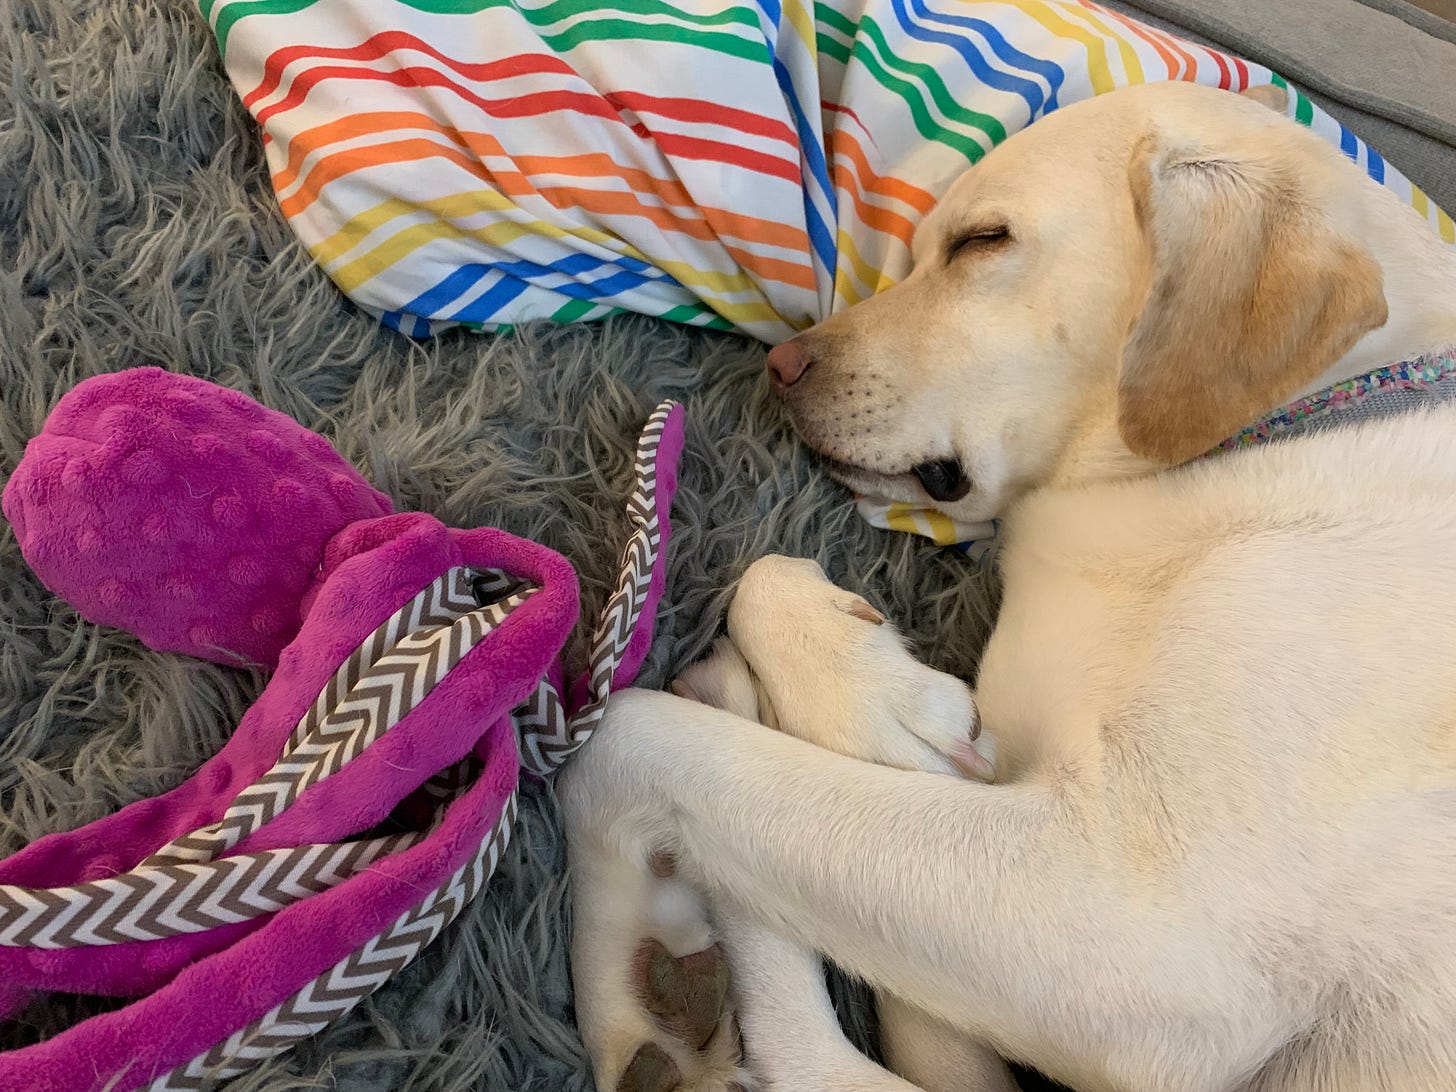 A yellow Labrador retriever sleeps with her head on a rainbow striped pillow on a gray couch. She has a purple octopus toy next to her. 